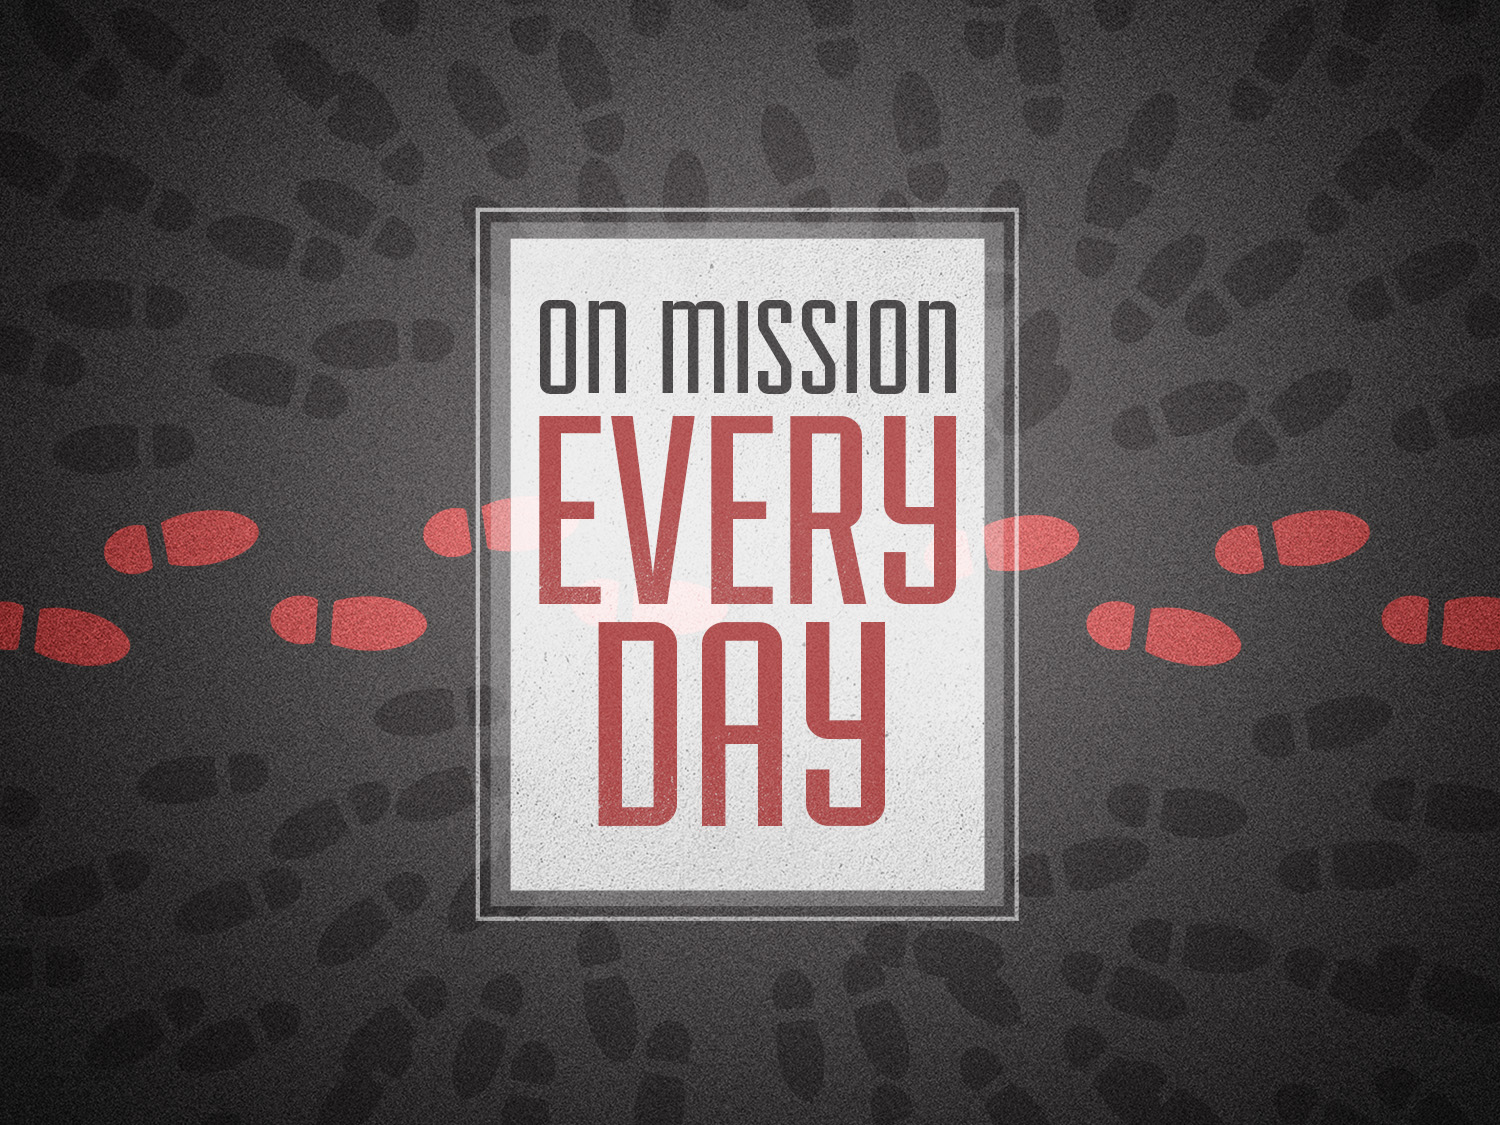 On Mission Every Day-Three Questions About Discipleship